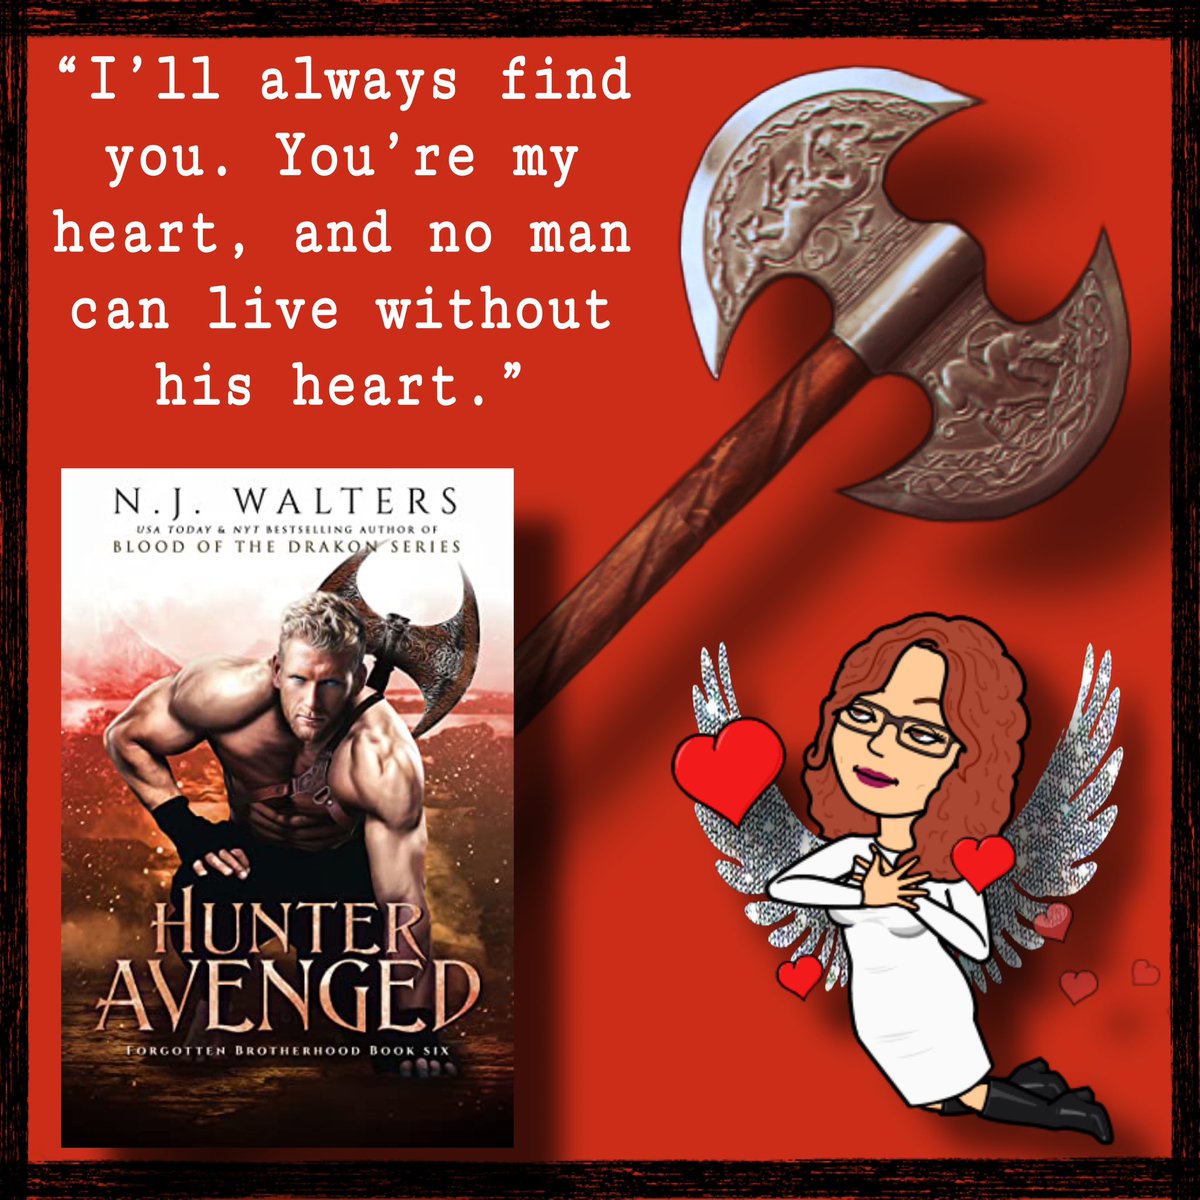 ✨✨ PRE-ORDER ✨✨

2 DAYS

“I’ll always find you. You’re my heart, and no man can live without his heart.”

Hunter Avenged by @njwaltersauthor 
#ForgottenBrotherhood Book 6

Universal eBook & Paperback 
books2read.com/u/bPN1Vd

#BookCrackSeries #SafeRead #BookSnobApproved #HEA